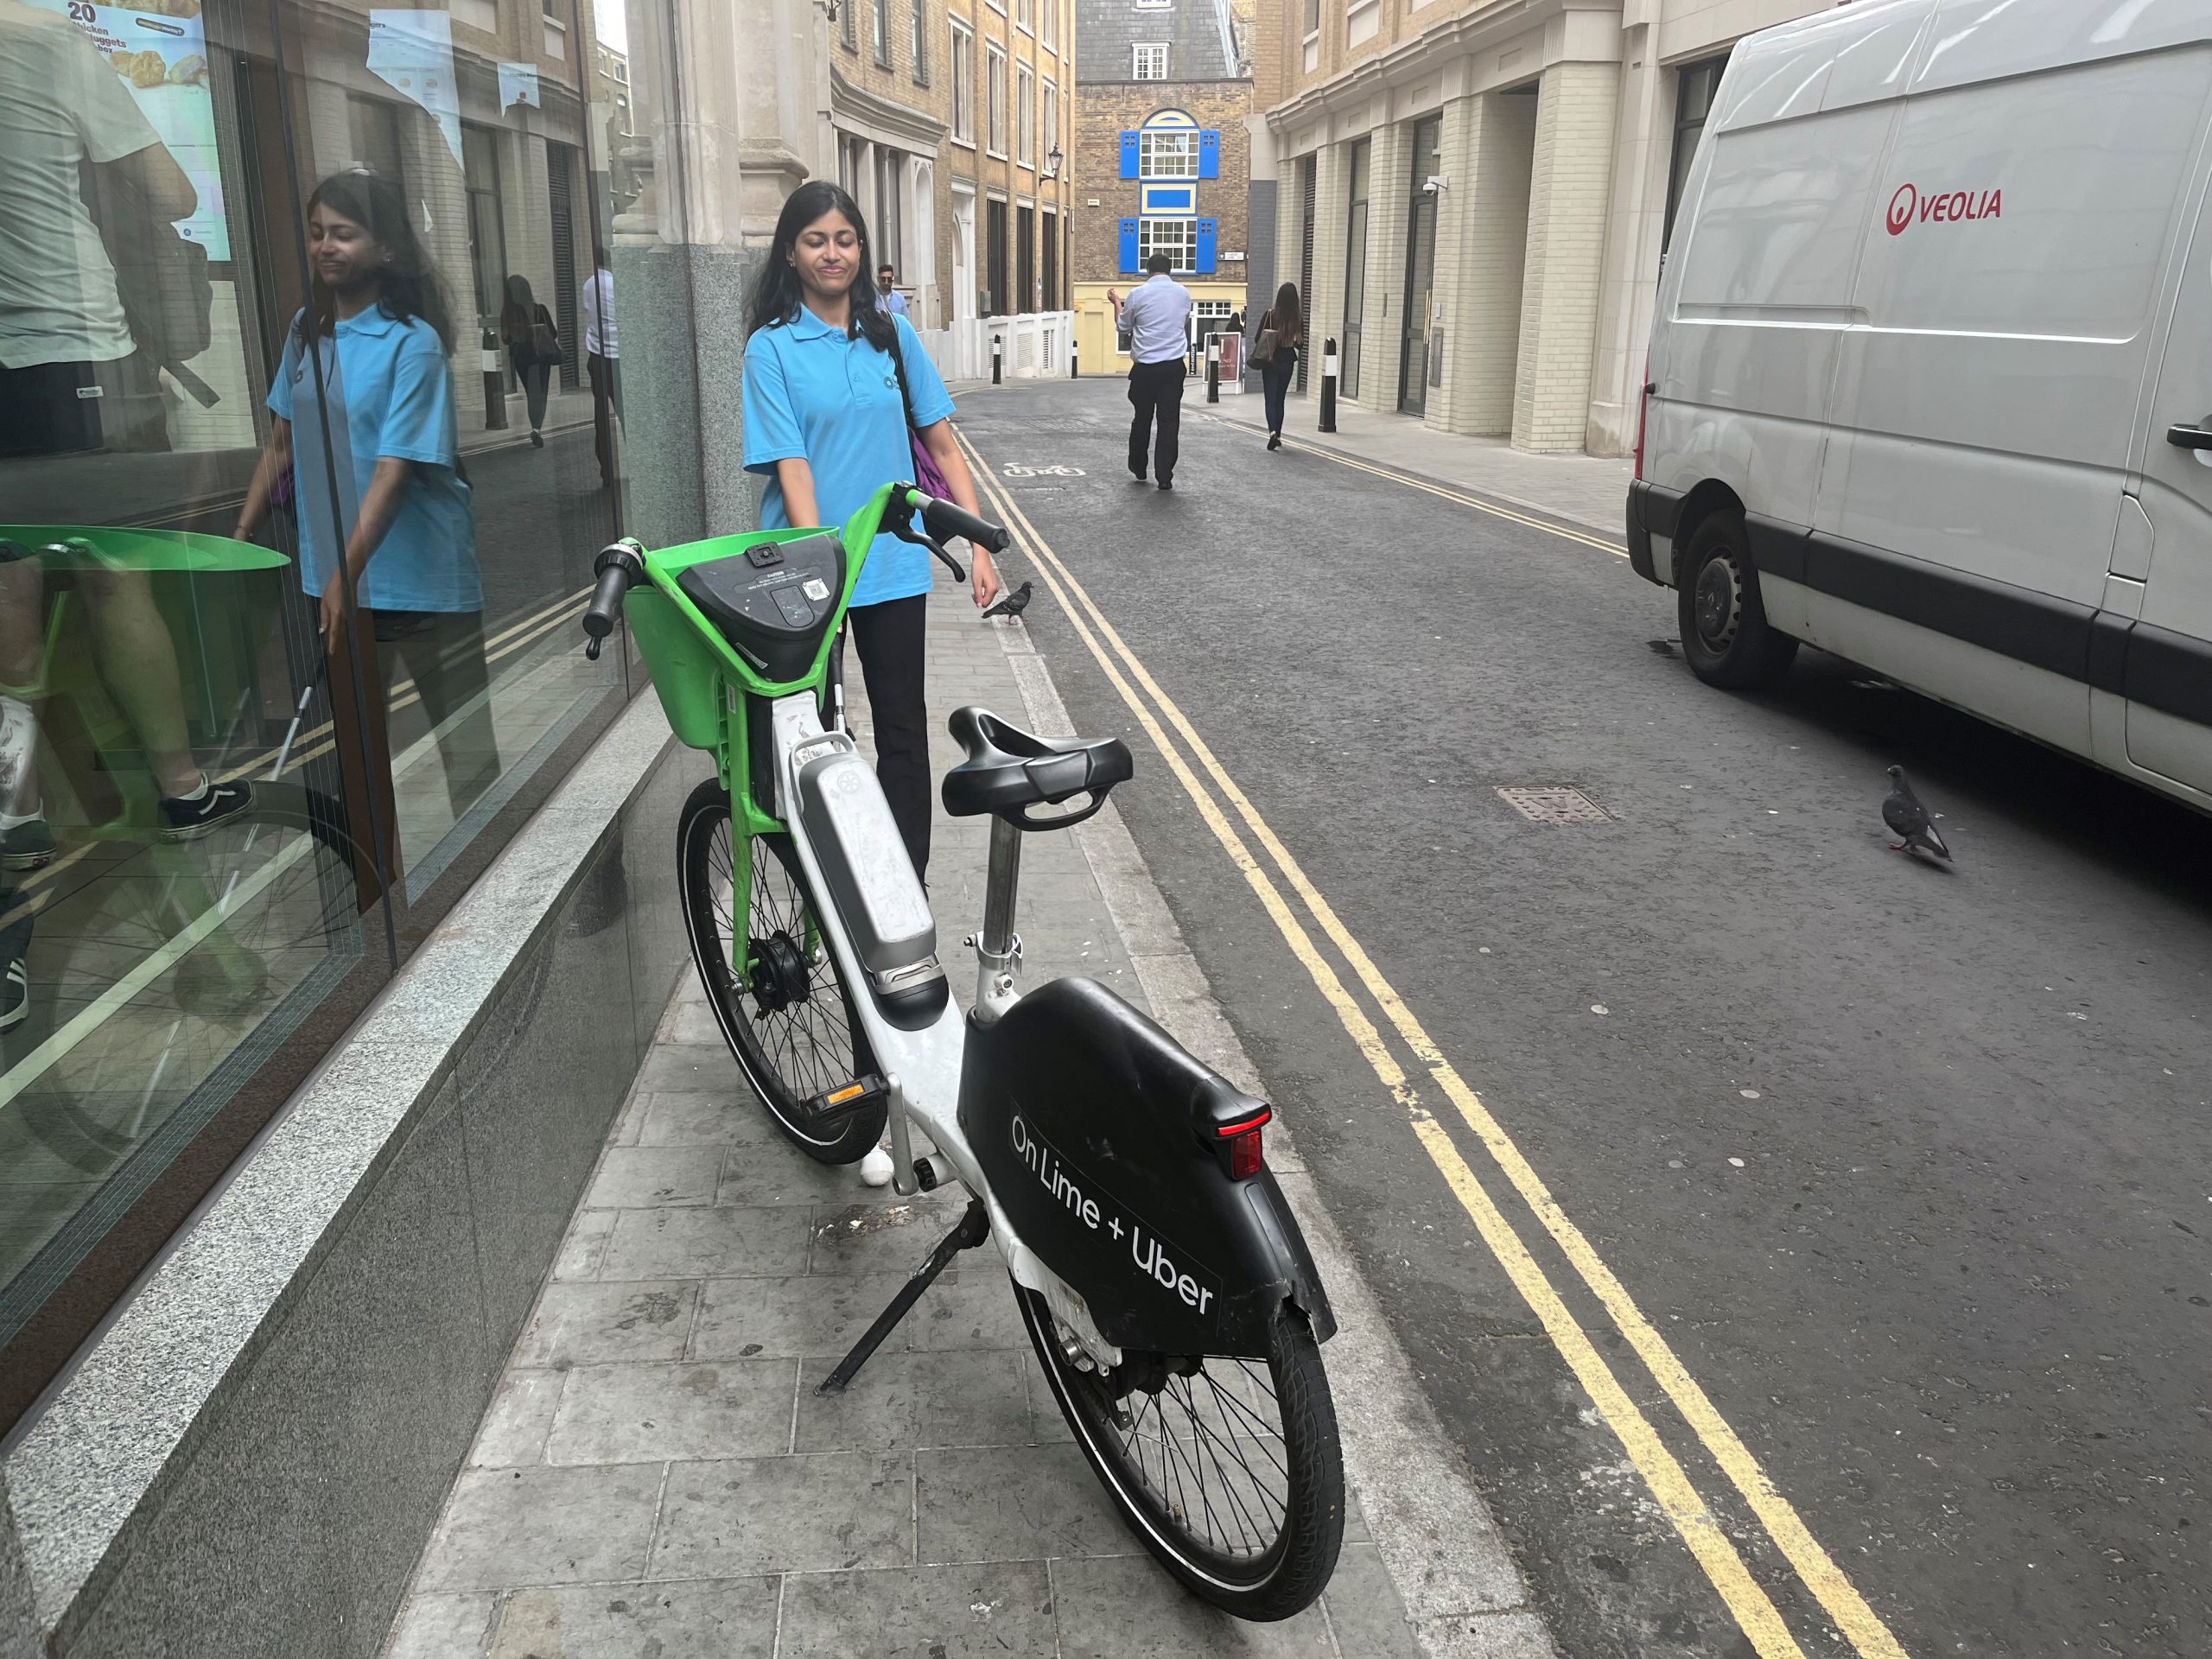 Vidya Nathan, London SLC member, is walking down a narrow pavement next to a road. Using her long cane, she encounters a Lime Bike parked across the pavement which prevents her from passing.